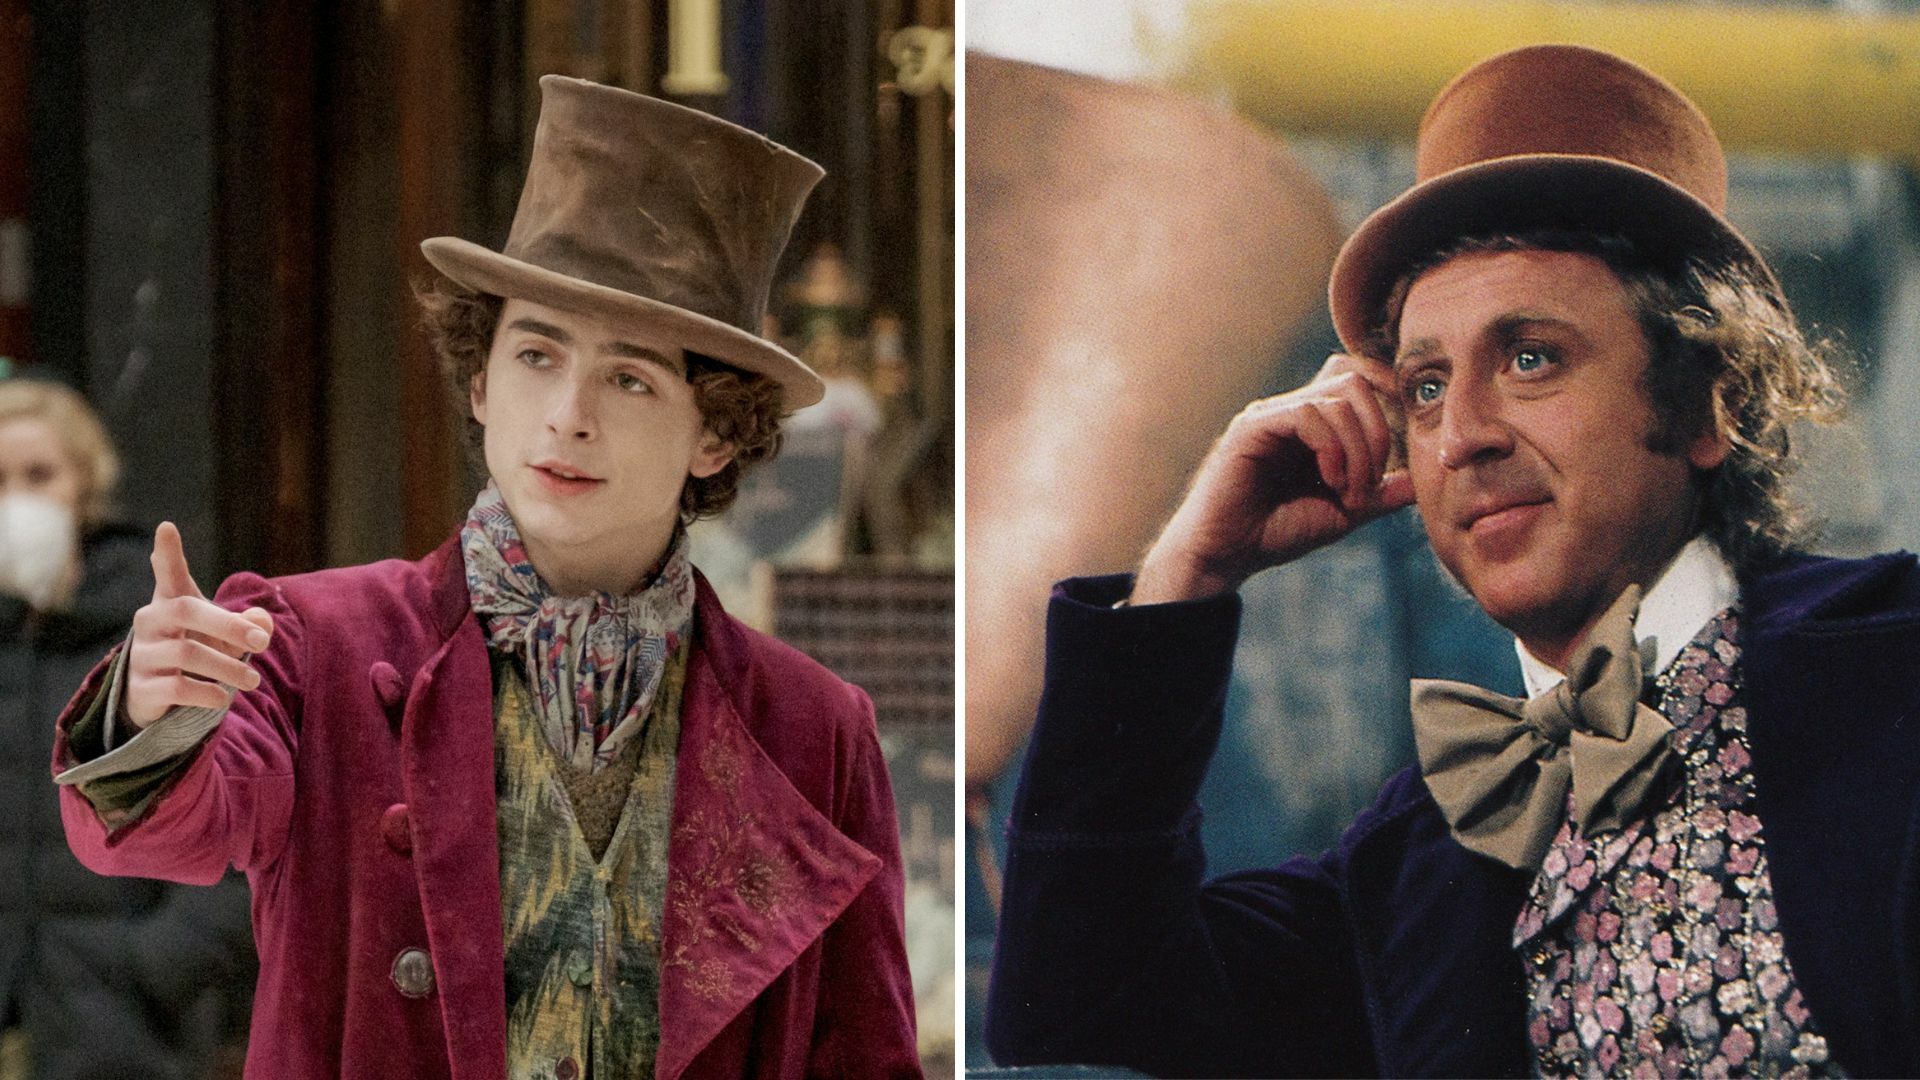 Timothee Chalamet and Gene Wilder as Willy Wonka. 